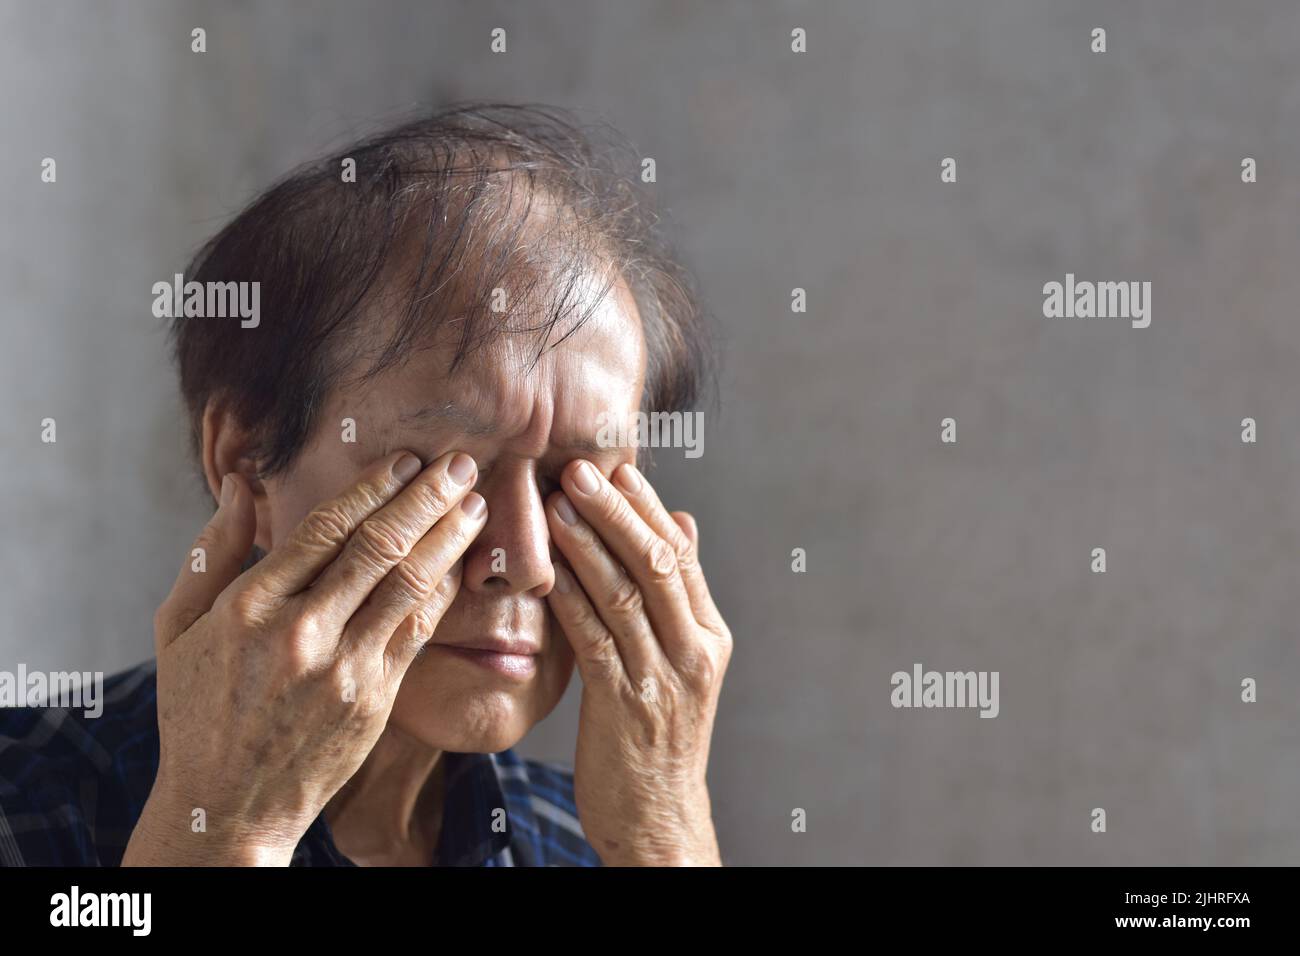 Asian elder man rubbing his eye. Concept of eye pain, strain or itchy eyelid. Stock Photo